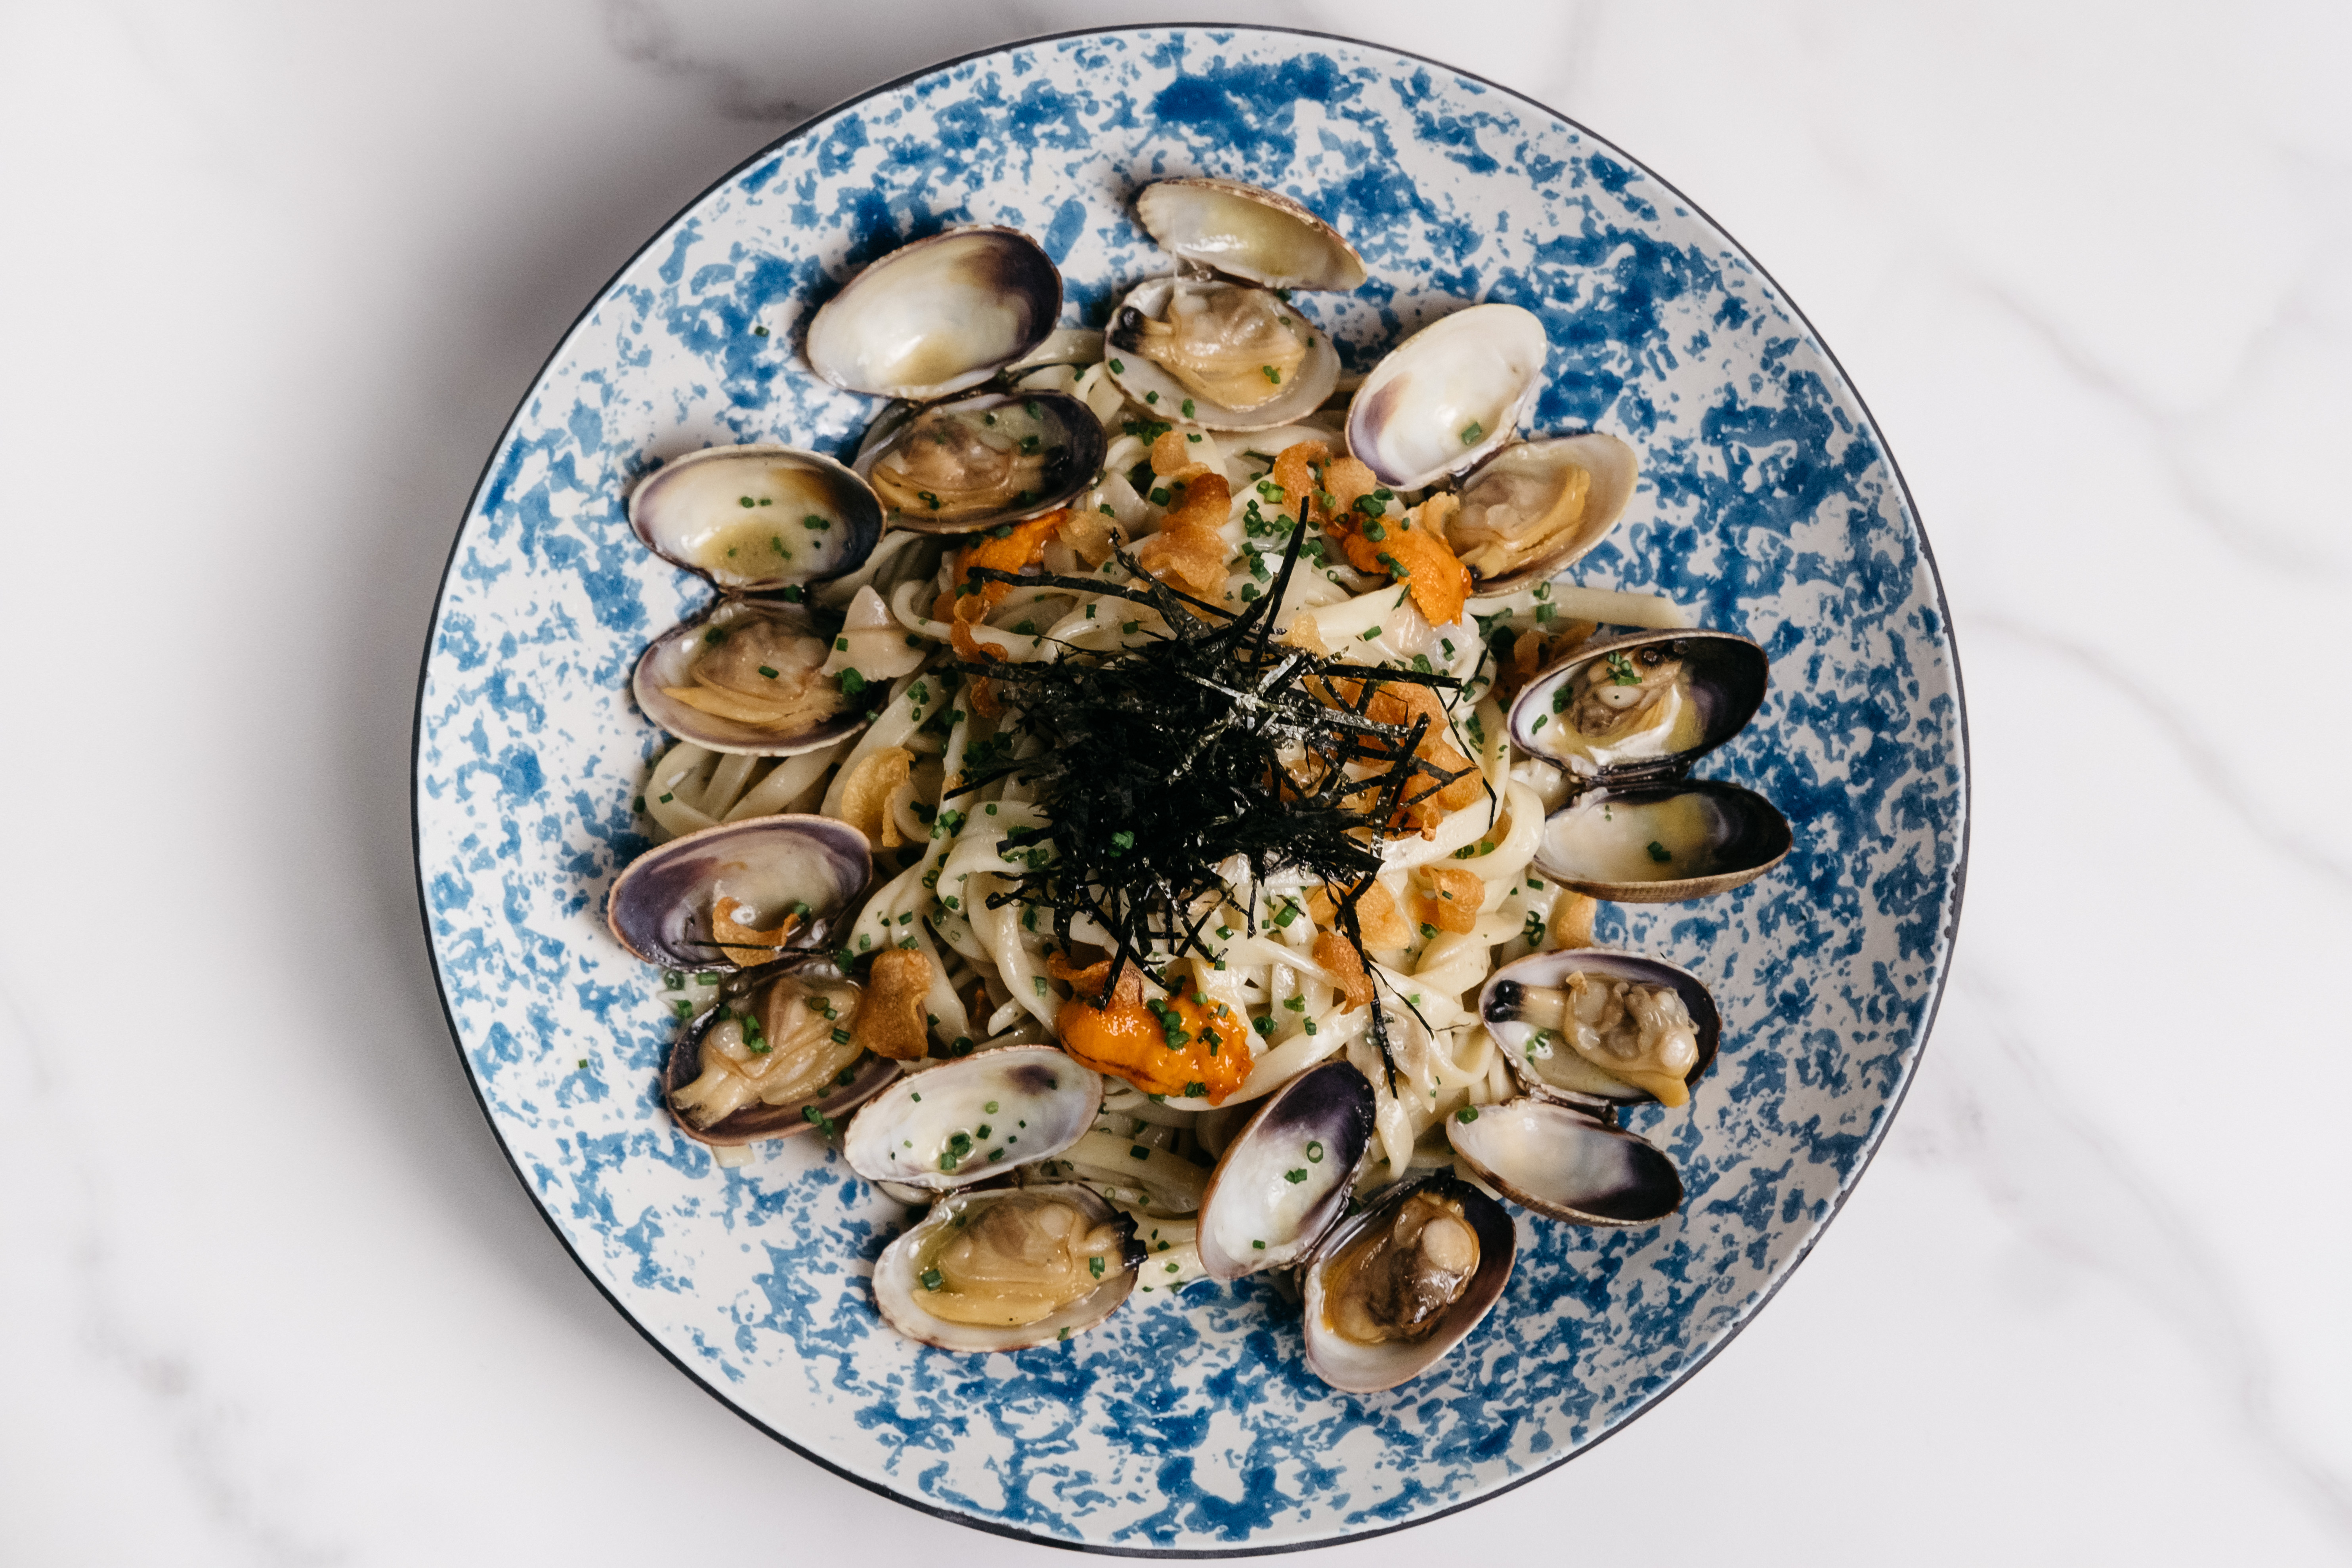 Navy Blue’s spaghetti vongole dish, with clams served over spaghetti with a garnish of seaweed.